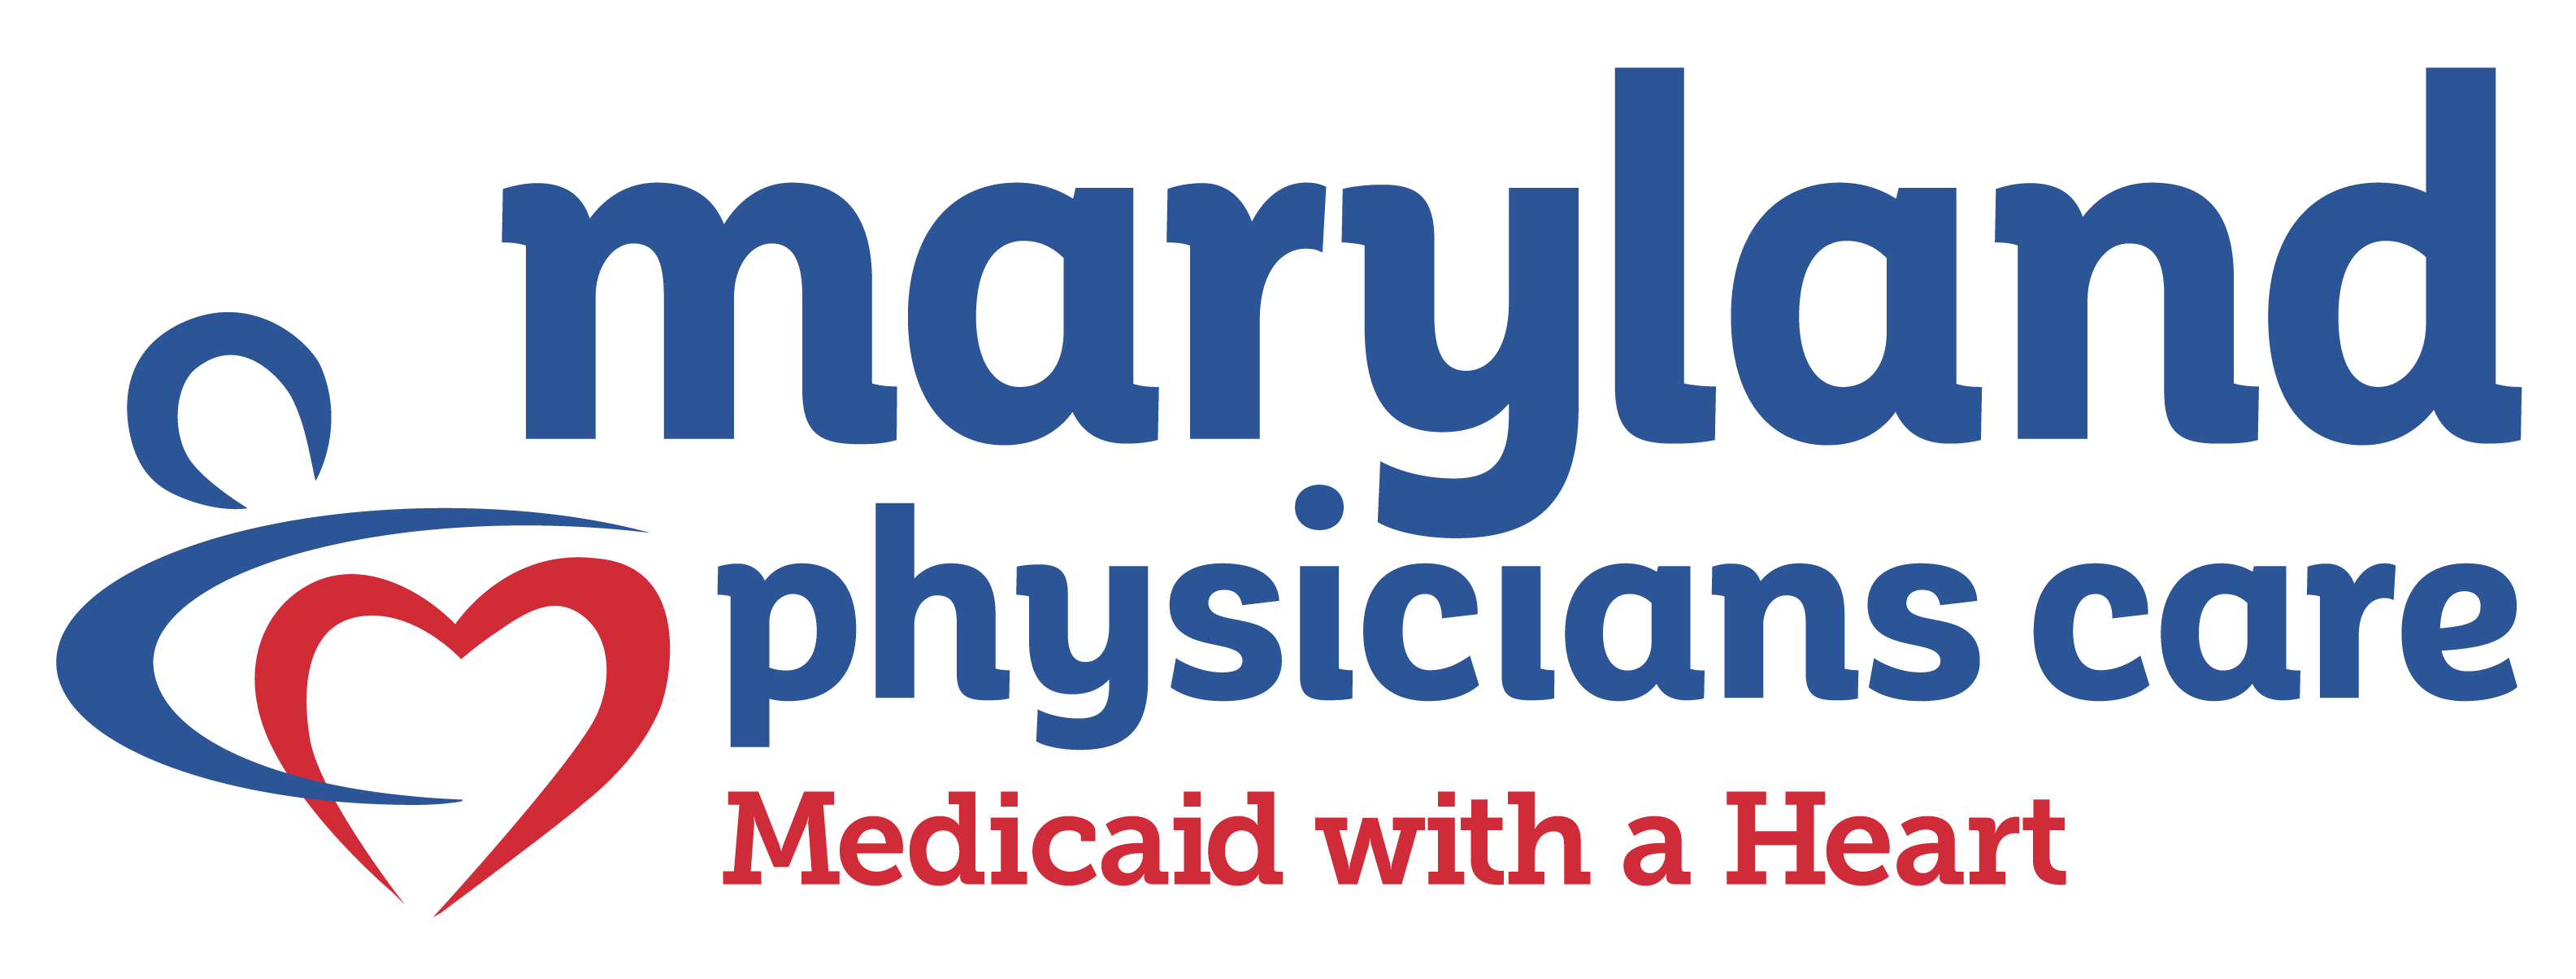 Maryland Physicians Care - Medicaid with a Heart